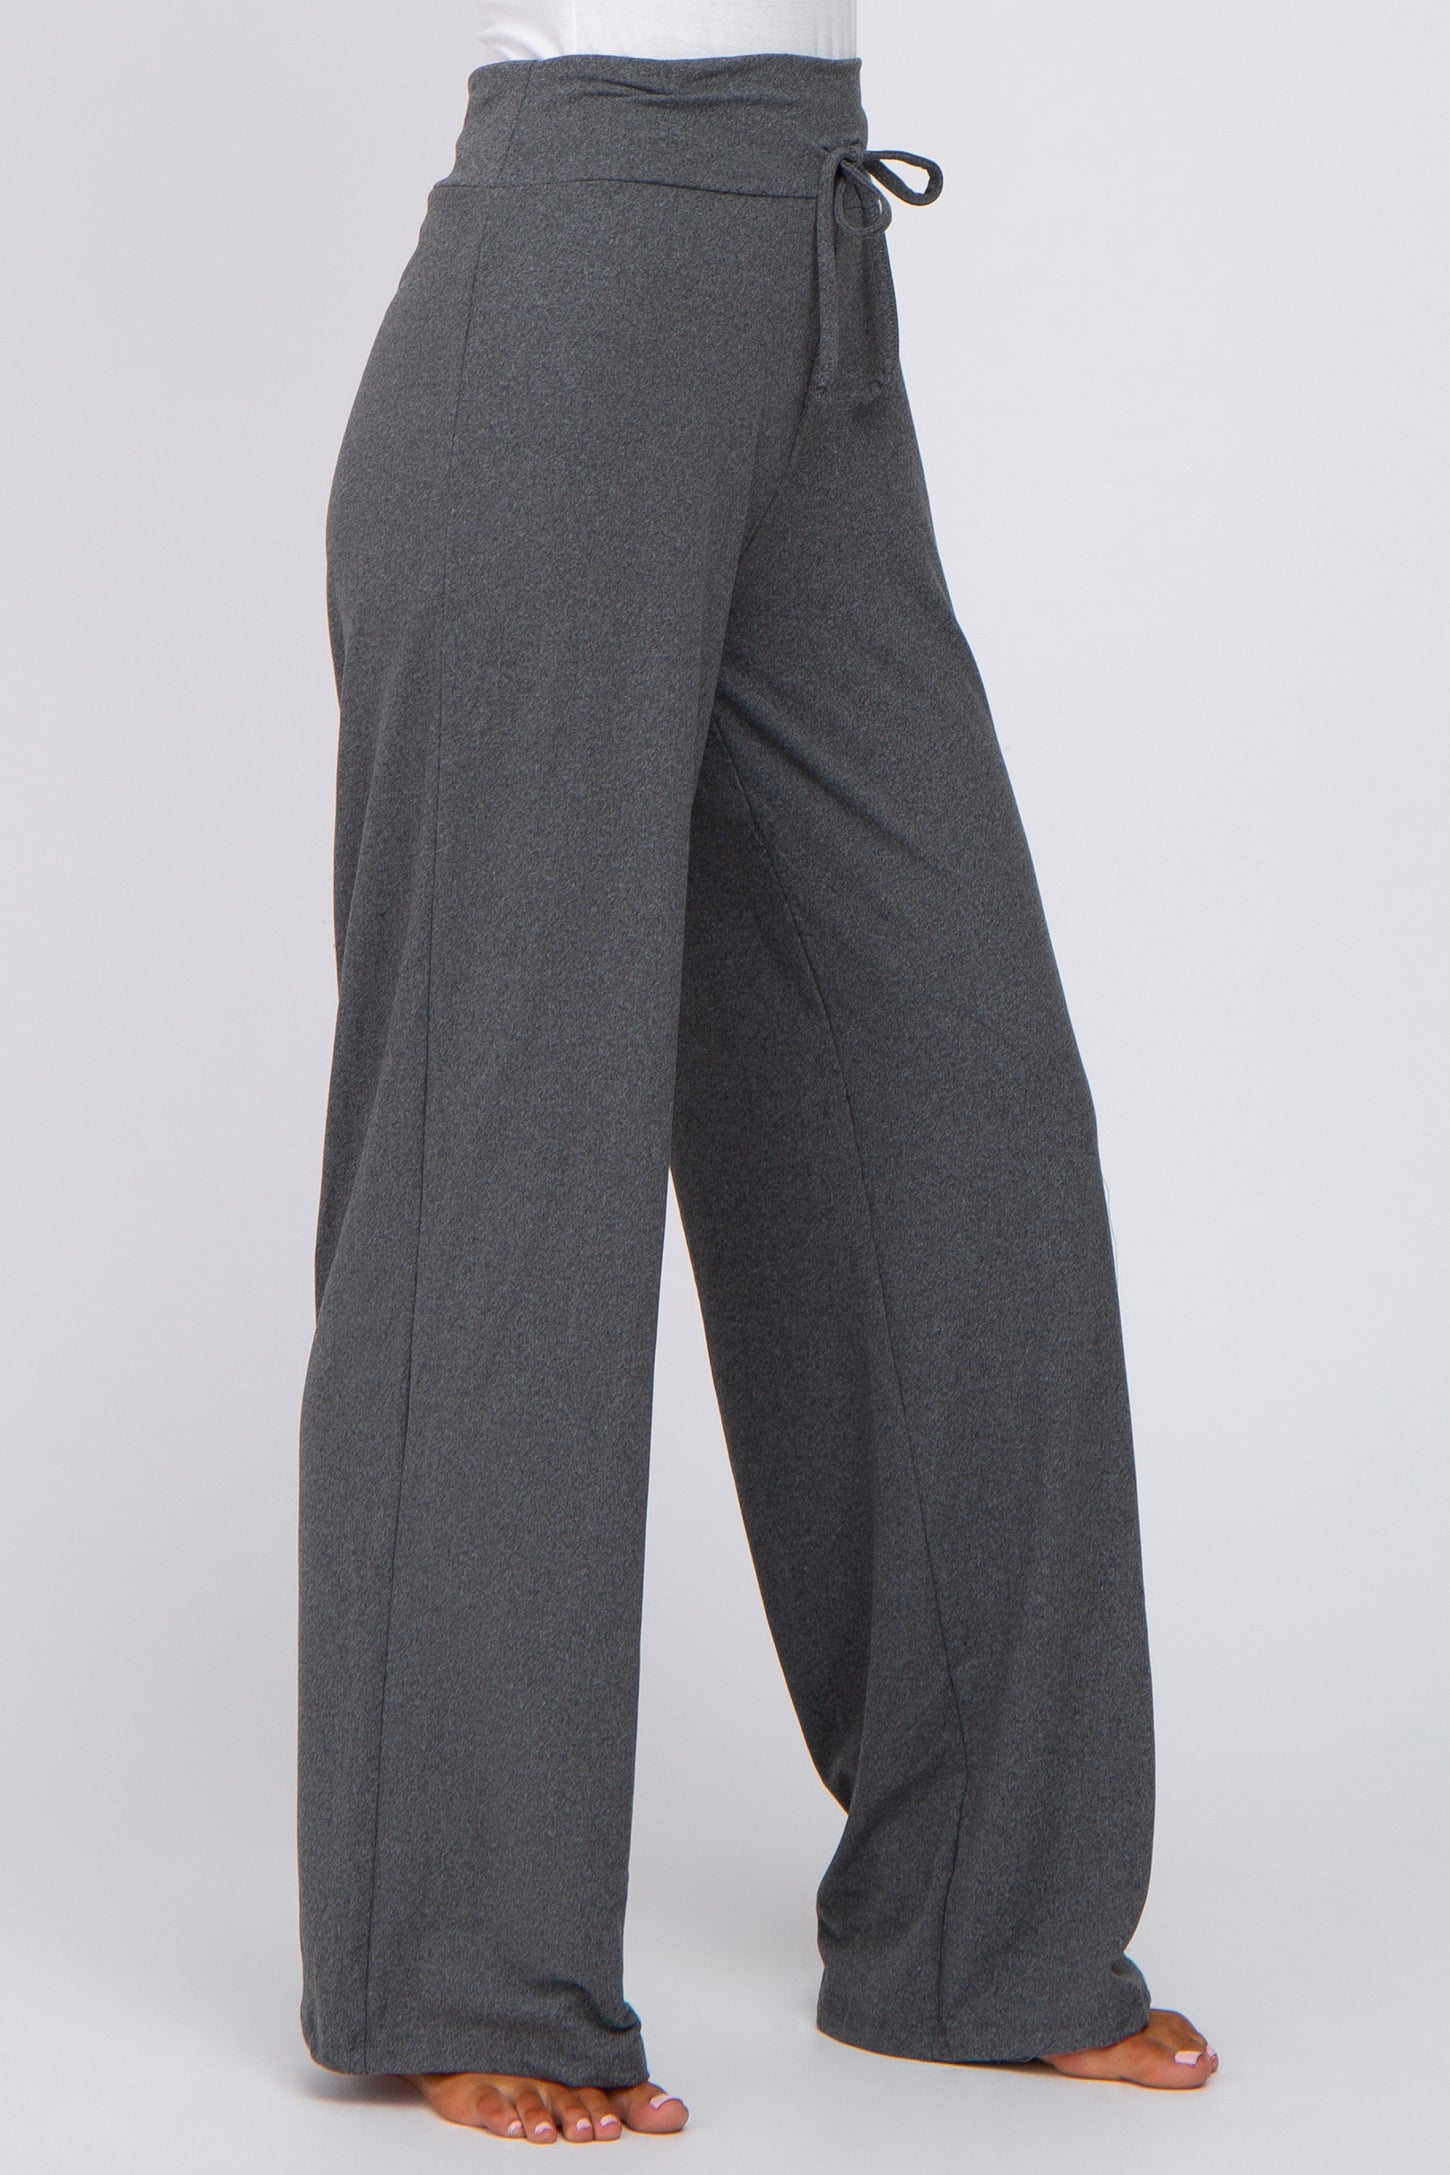 Charcoal Side Pocket Drawstring Ankle Tie Maternity Lounge Pants– PinkBlush